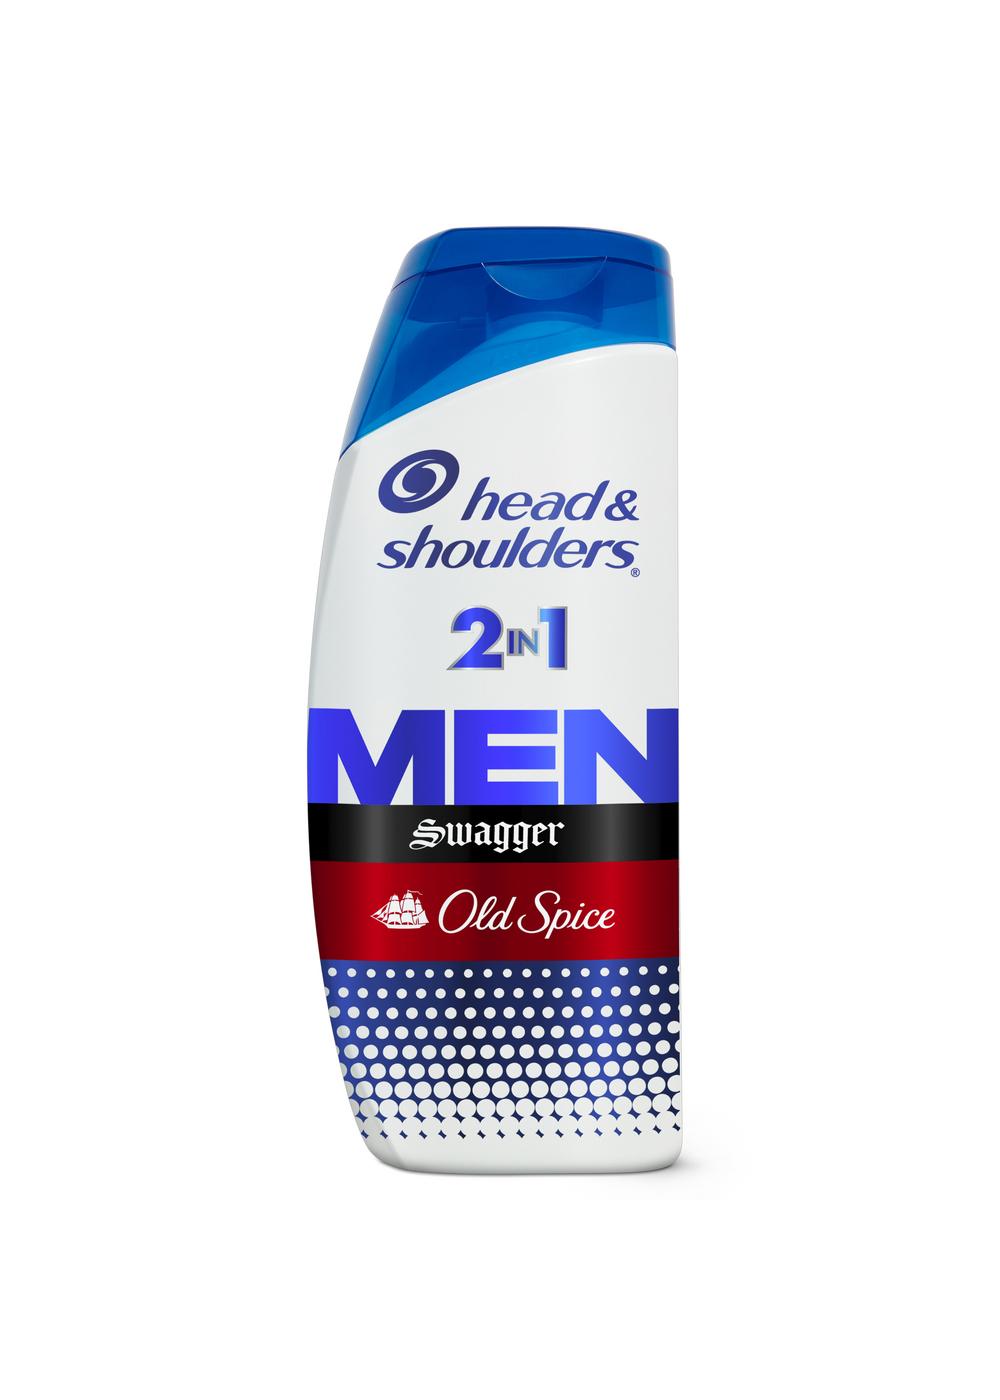 Head & Shoulders Old Spice 2 in 1 Men Dandruff Shampoo + Conditioner - Swagger; image 9 of 11